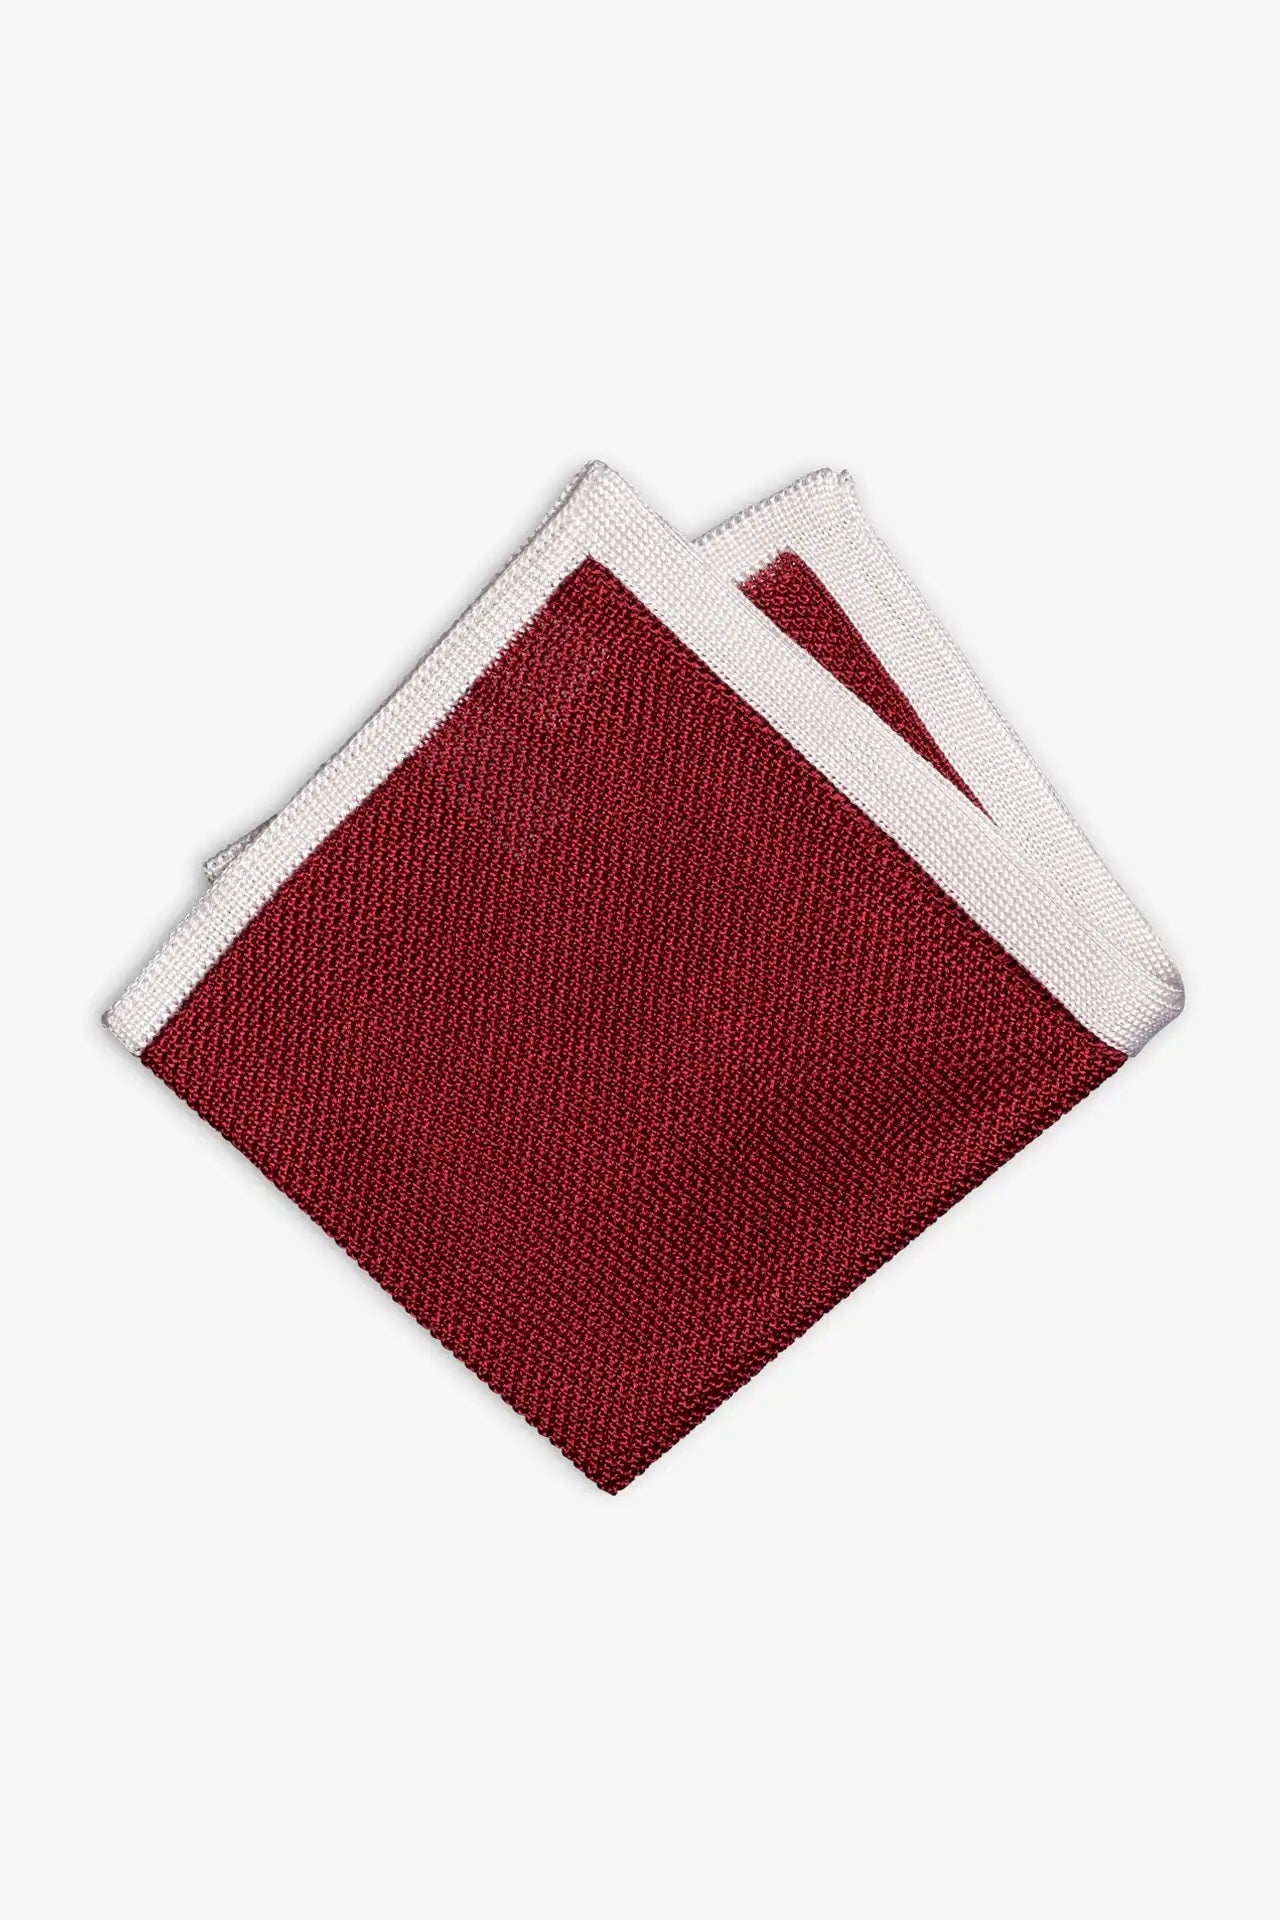 Red knitted pocket square with white frame. Made of silk in Italy.